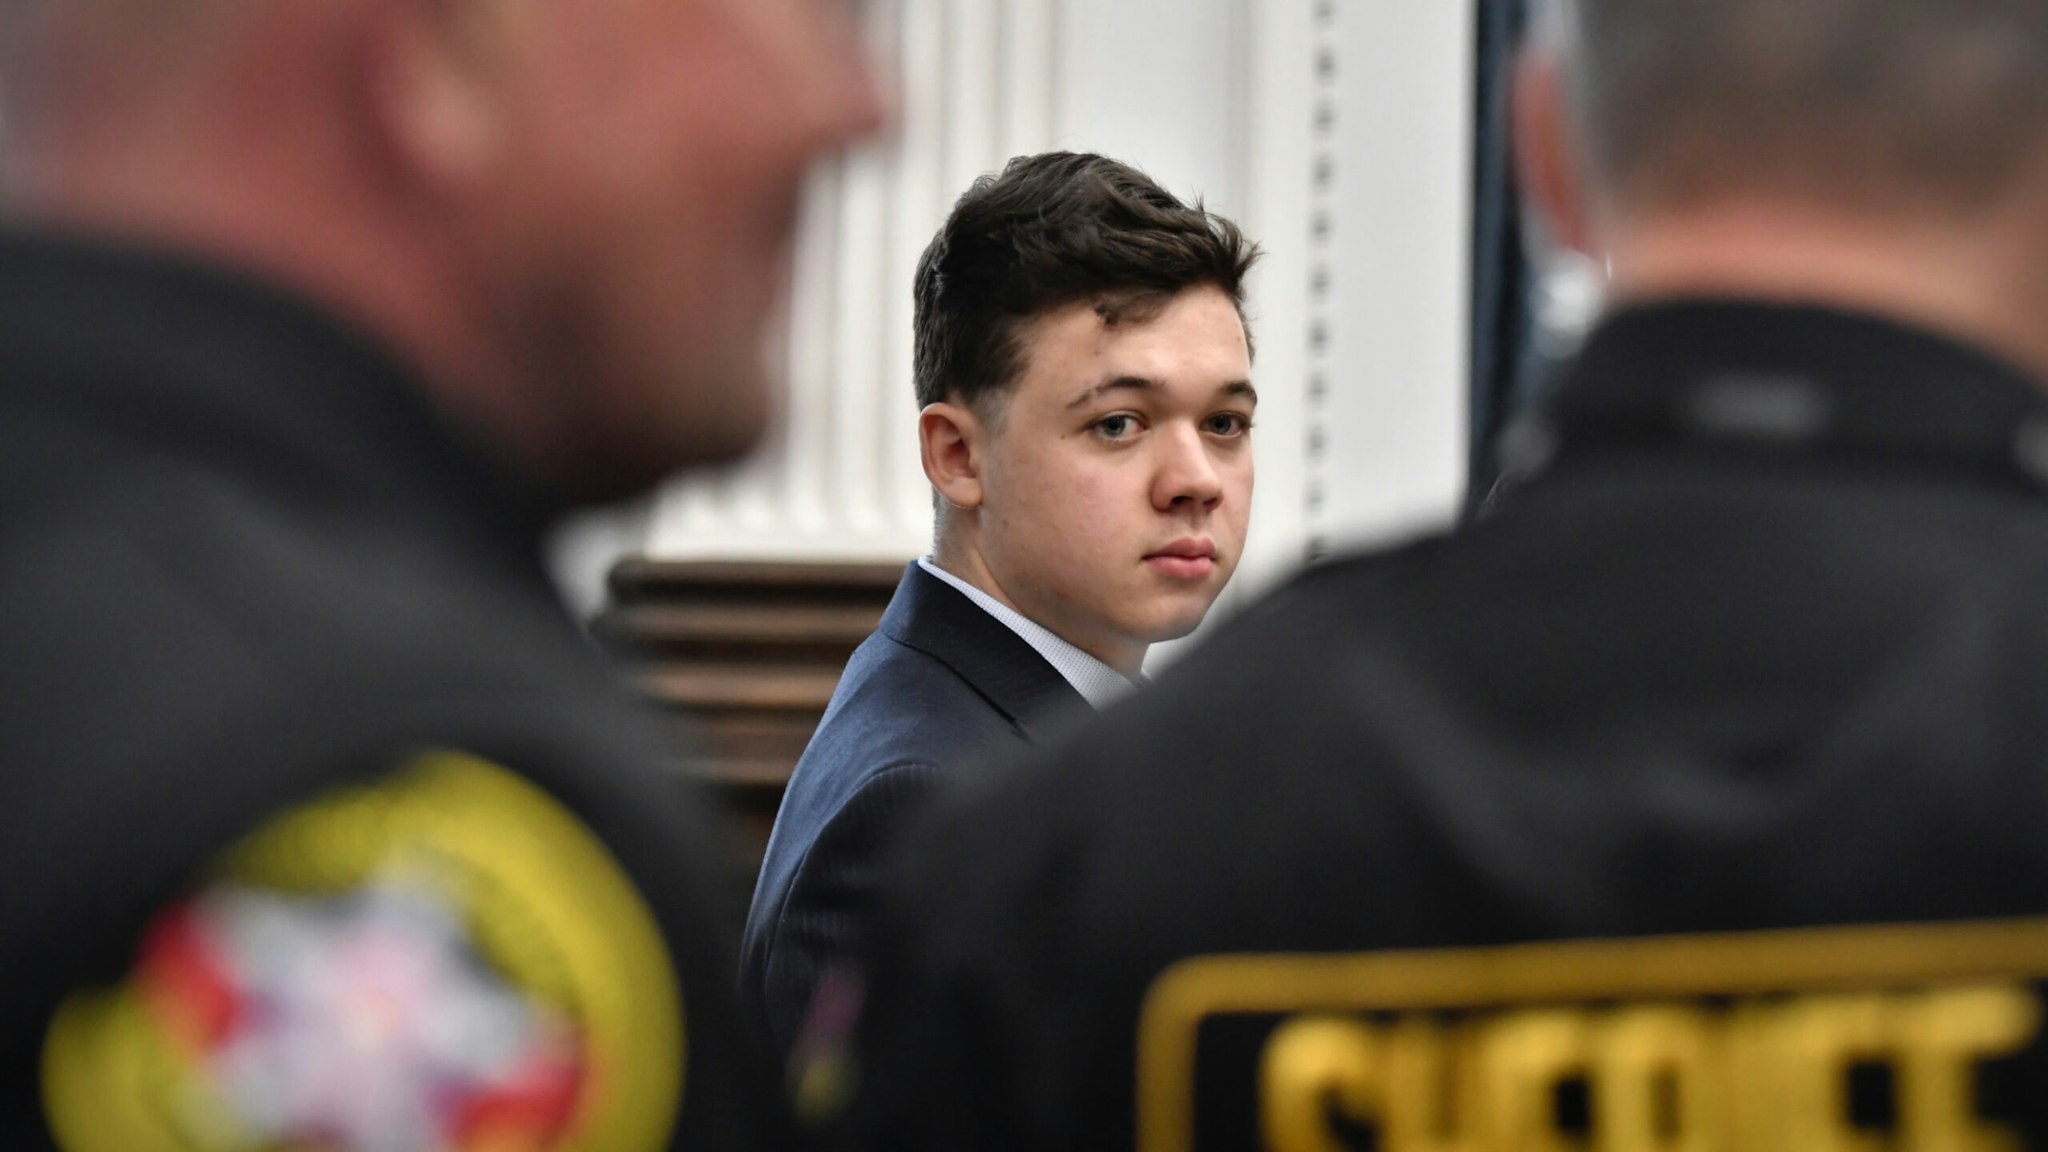 Kyle Rittenhouse, center, looks back as Kenosha County Sheriff's deputies enter the courtroom to escort him out of the room during a break in the trial at the Kenosha County Courthouse on November 5, 2021 in Kenosha, Wisconsin.